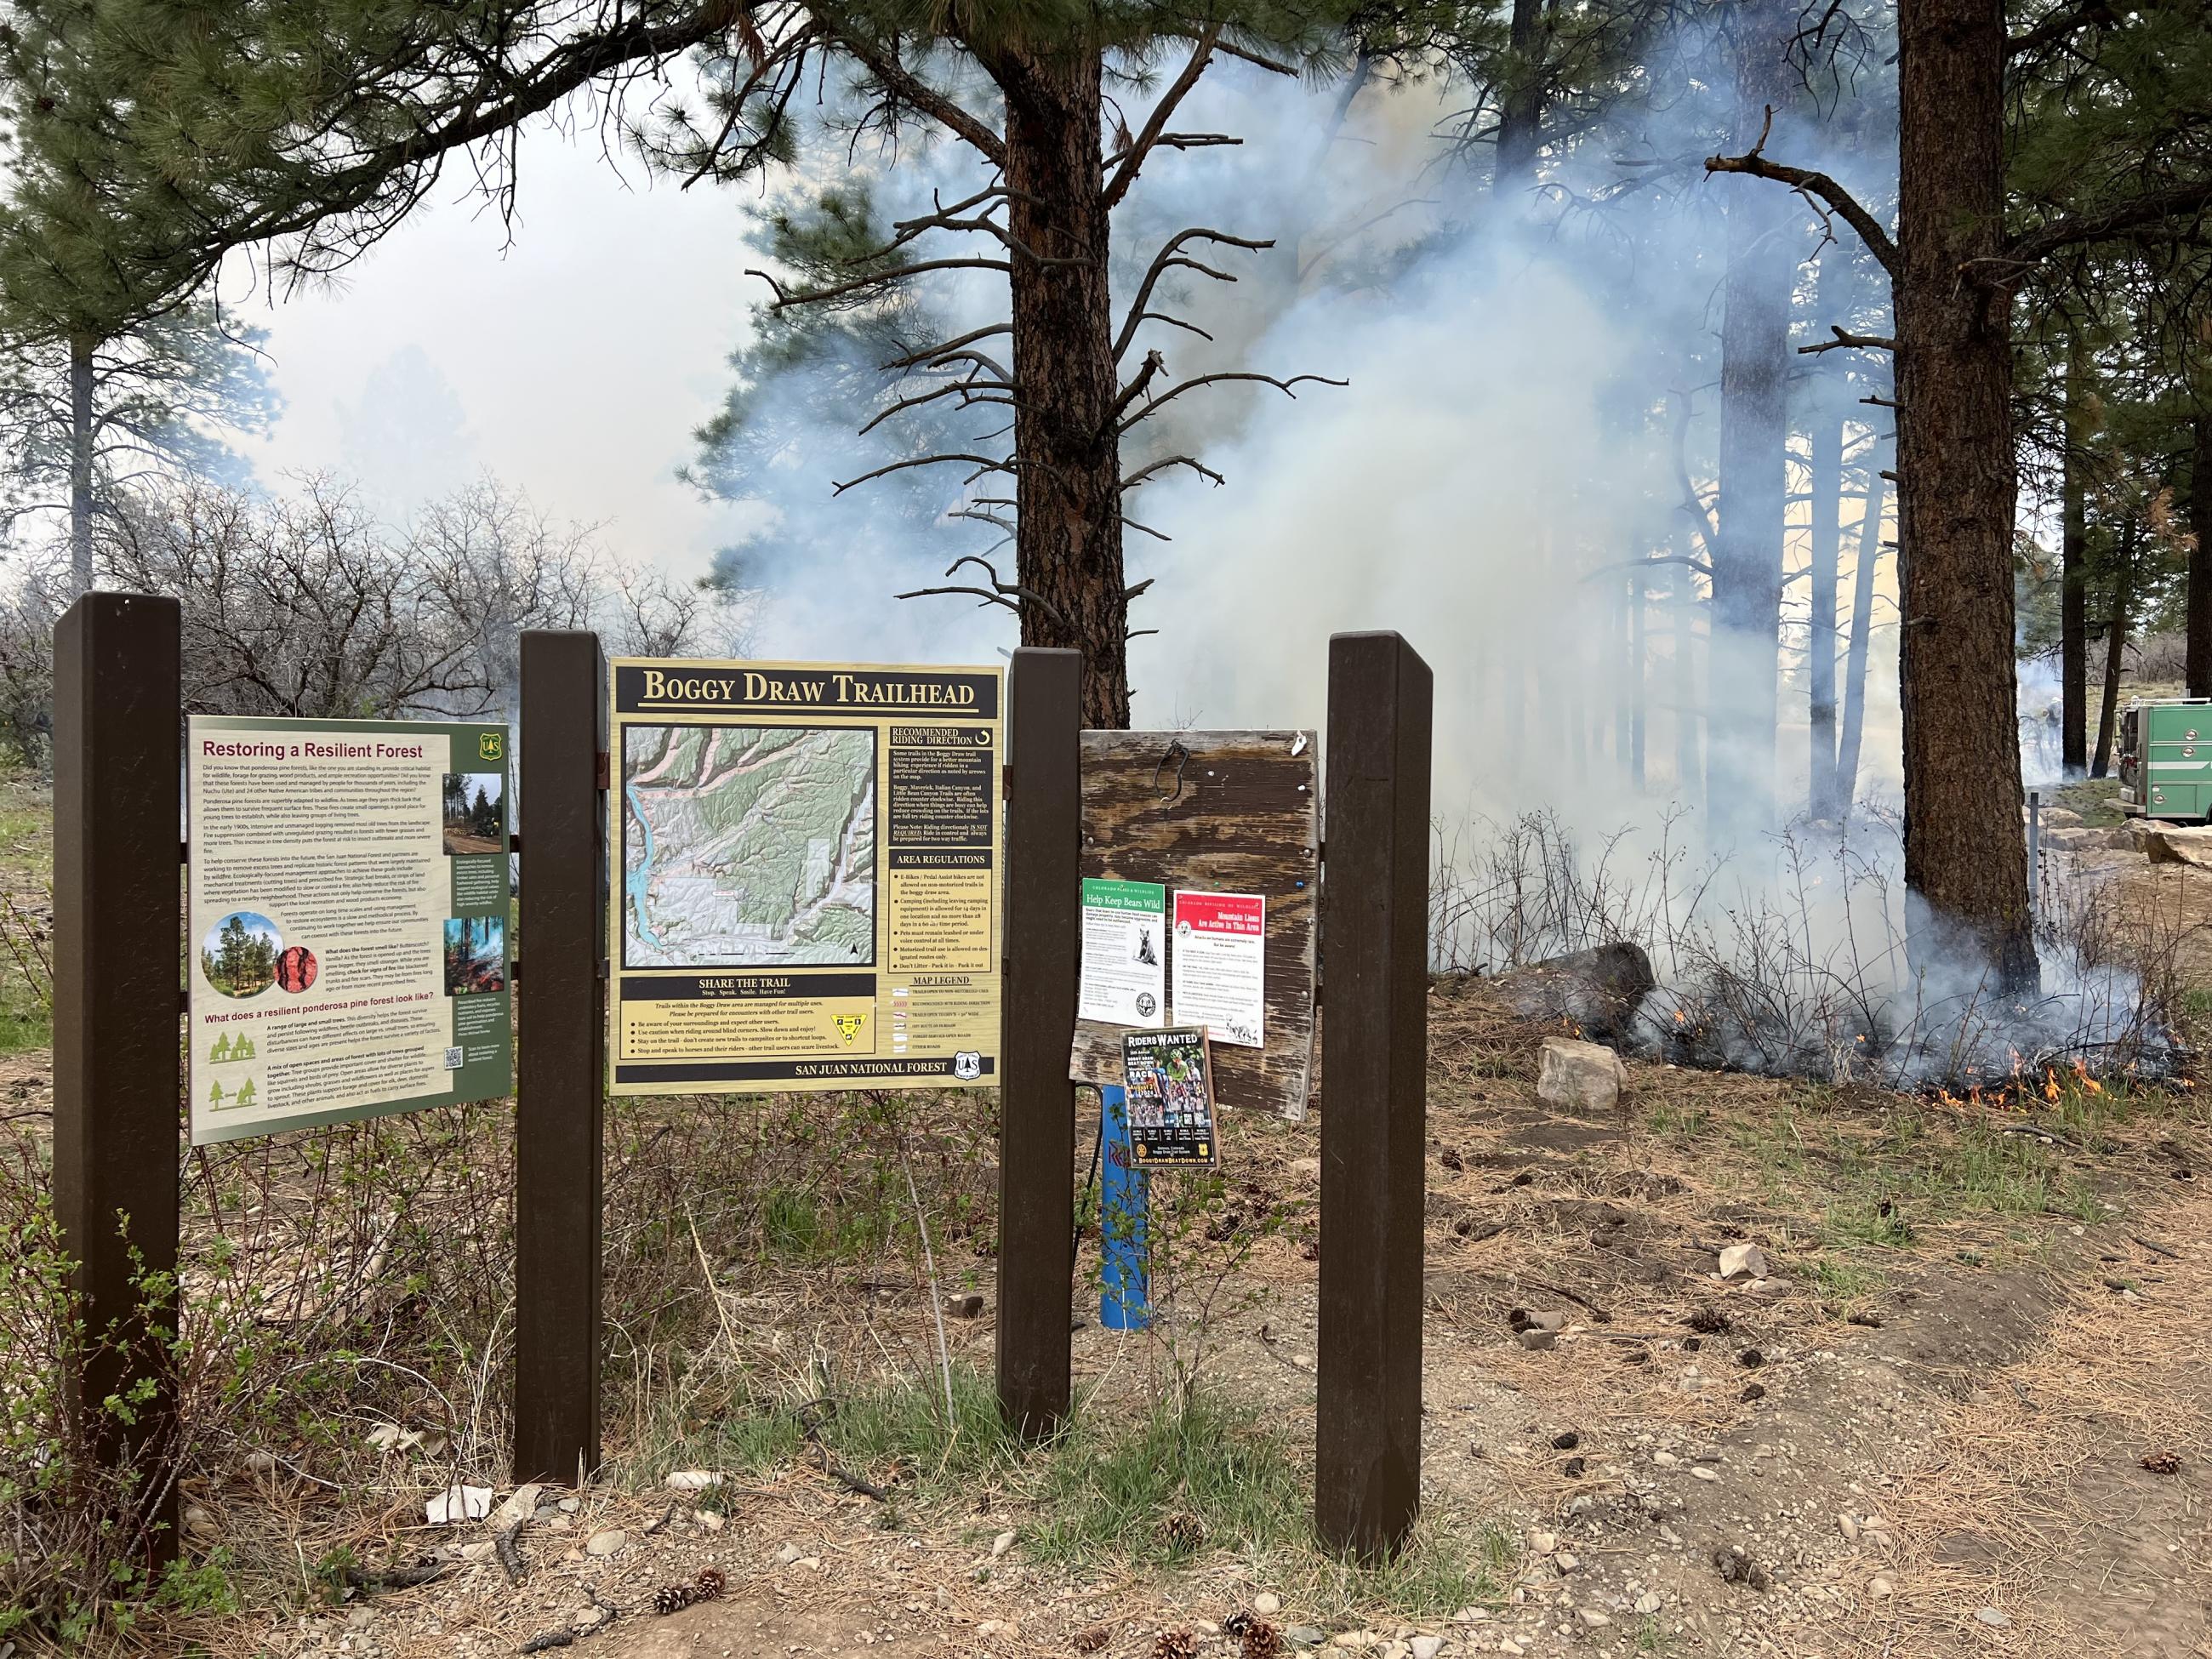 Smoke is visible rising from the forest floor with a series of signs marking a trailhead visible in front.